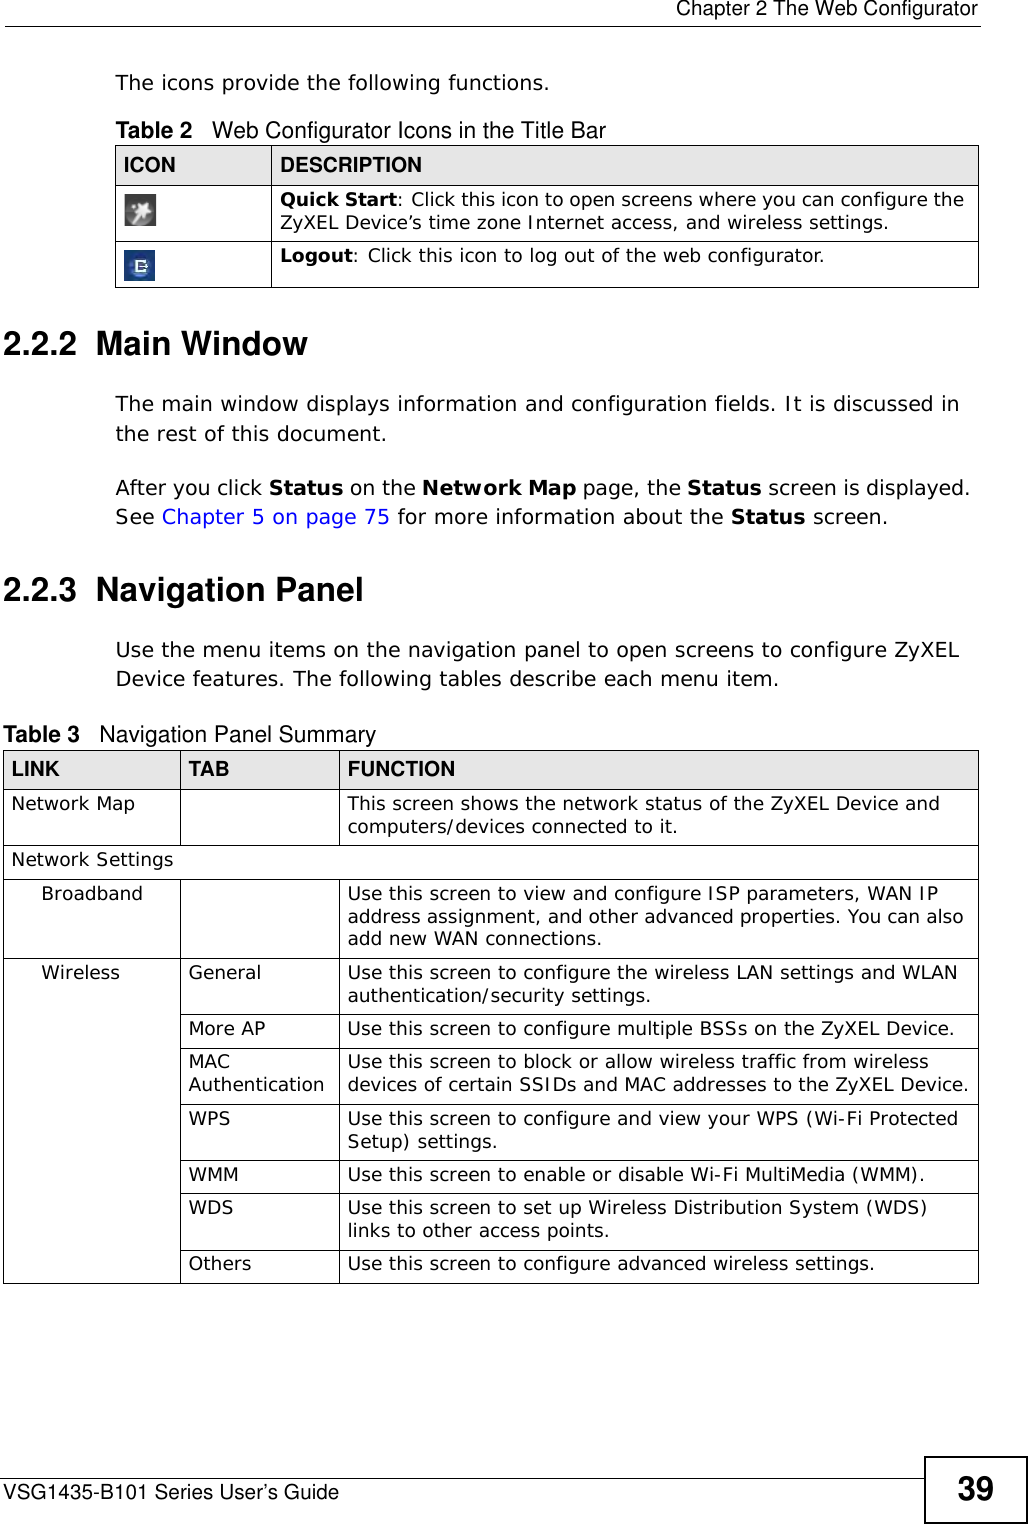  Chapter 2 The Web ConfiguratorVSG1435-B101 Series User’s Guide 39The icons provide the following functions.2.2.2  Main WindowThe main window displays information and configuration fields. It is discussed in the rest of this document.After you click Status on the Network Map page, the Status screen is displayed. See Chapter 5 on page 75 for more information about the Status screen.2.2.3  Navigation PanelUse the menu items on the navigation panel to open screens to configure ZyXEL Device features. The following tables describe each menu item.       Table 2   Web Configurator Icons in the Title BarICON  DESCRIPTIONQuick Start: Click this icon to open screens where you can configure the ZyXEL Device’s time zone Internet access, and wireless settings.Logout: Click this icon to log out of the web configurator.Table 3   Navigation Panel SummaryLINK TAB FUNCTIONNetwork Map This screen shows the network status of the ZyXEL Device and computers/devices connected to it.Network SettingsBroadband Use this screen to view and configure ISP parameters, WAN IP address assignment, and other advanced properties. You can also add new WAN connections.Wireless General Use this screen to configure the wireless LAN settings and WLAN authentication/security settings. More AP Use this screen to configure multiple BSSs on the ZyXEL Device.MAC Authentication Use this screen to block or allow wireless traffic from wireless devices of certain SSIDs and MAC addresses to the ZyXEL Device.WPS Use this screen to configure and view your WPS (Wi-Fi Protected Setup) settings.WMM Use this screen to enable or disable Wi-Fi MultiMedia (WMM).WDS Use this screen to set up Wireless Distribution System (WDS) links to other access points.Others Use this screen to configure advanced wireless settings.